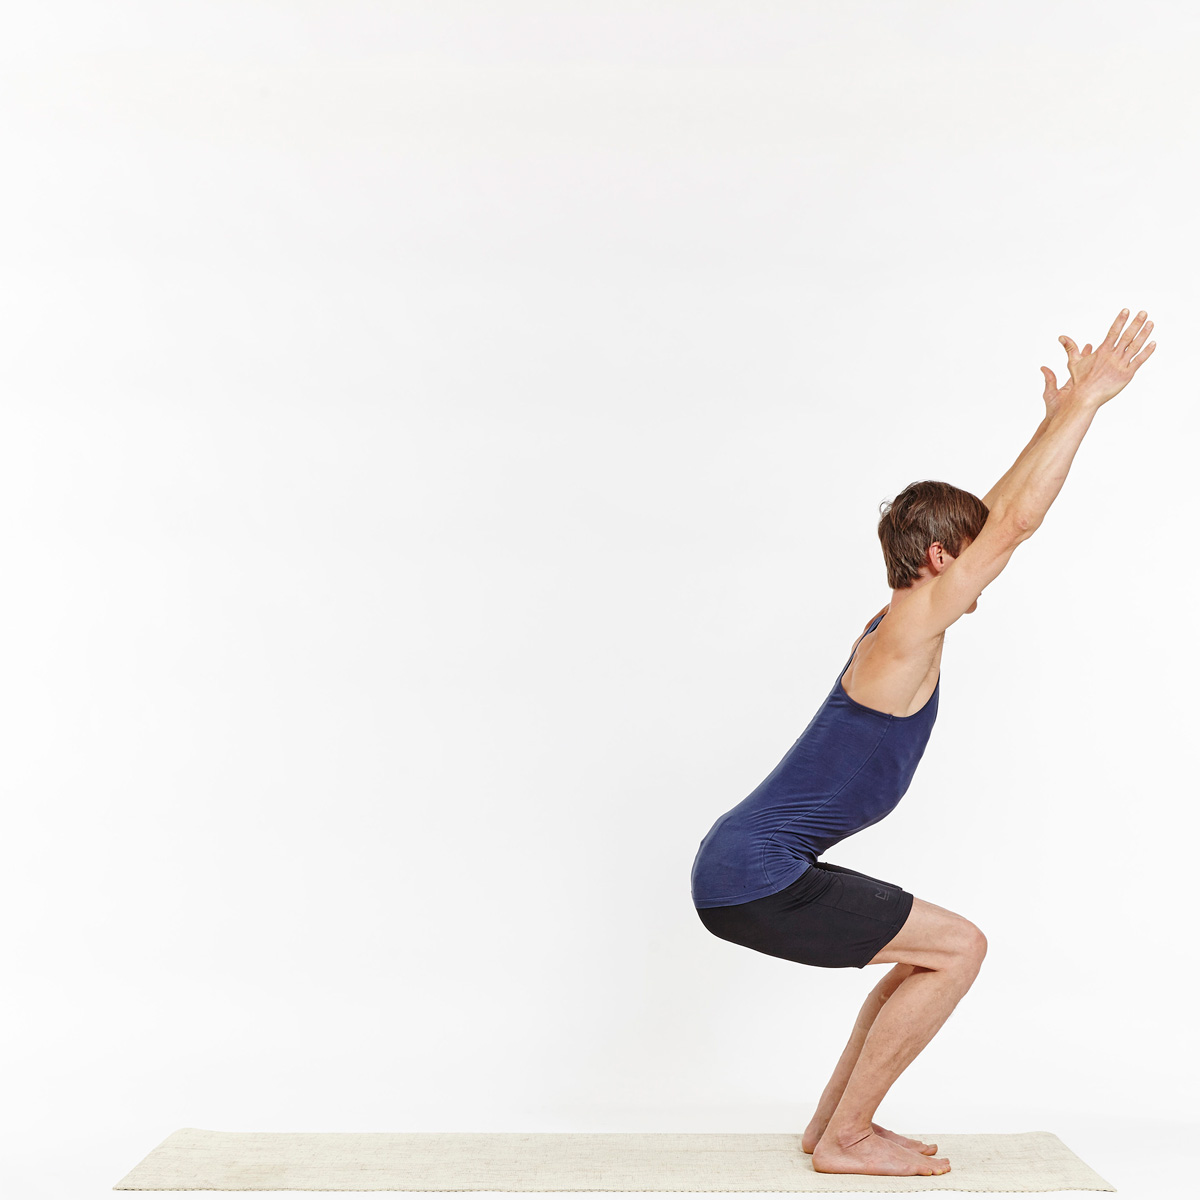 A Yoga Program To Improve Ankle Mobility – Yoga For Mountain Bikers